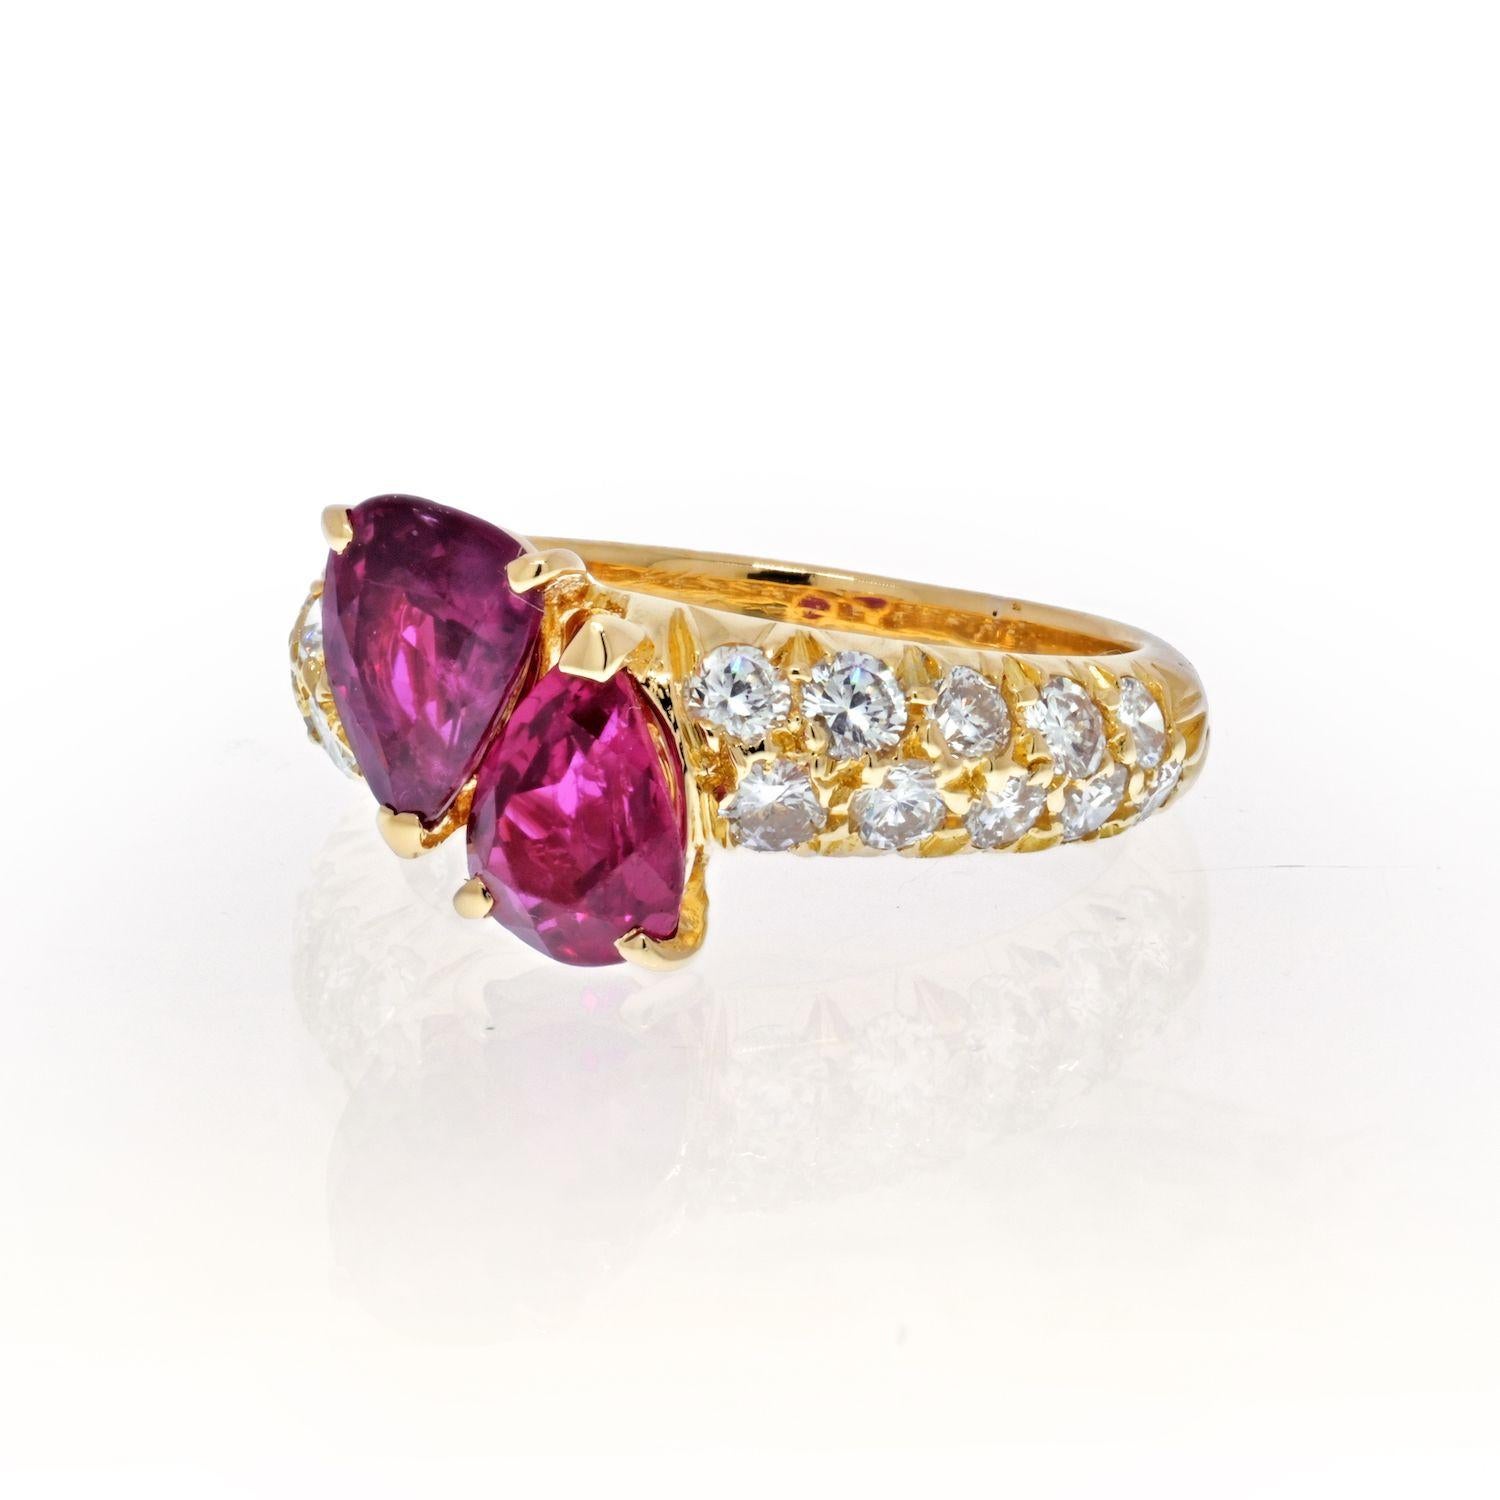 Vintage Van Cleef and Arpels 18K yellow gold cross-over or toi et moi ring consisting of 2 pear shaped rubies weighing 3.00 carats in total. Can serve as a lovely promise or an engagement ring. 
This style of ring has been popular as an engagement